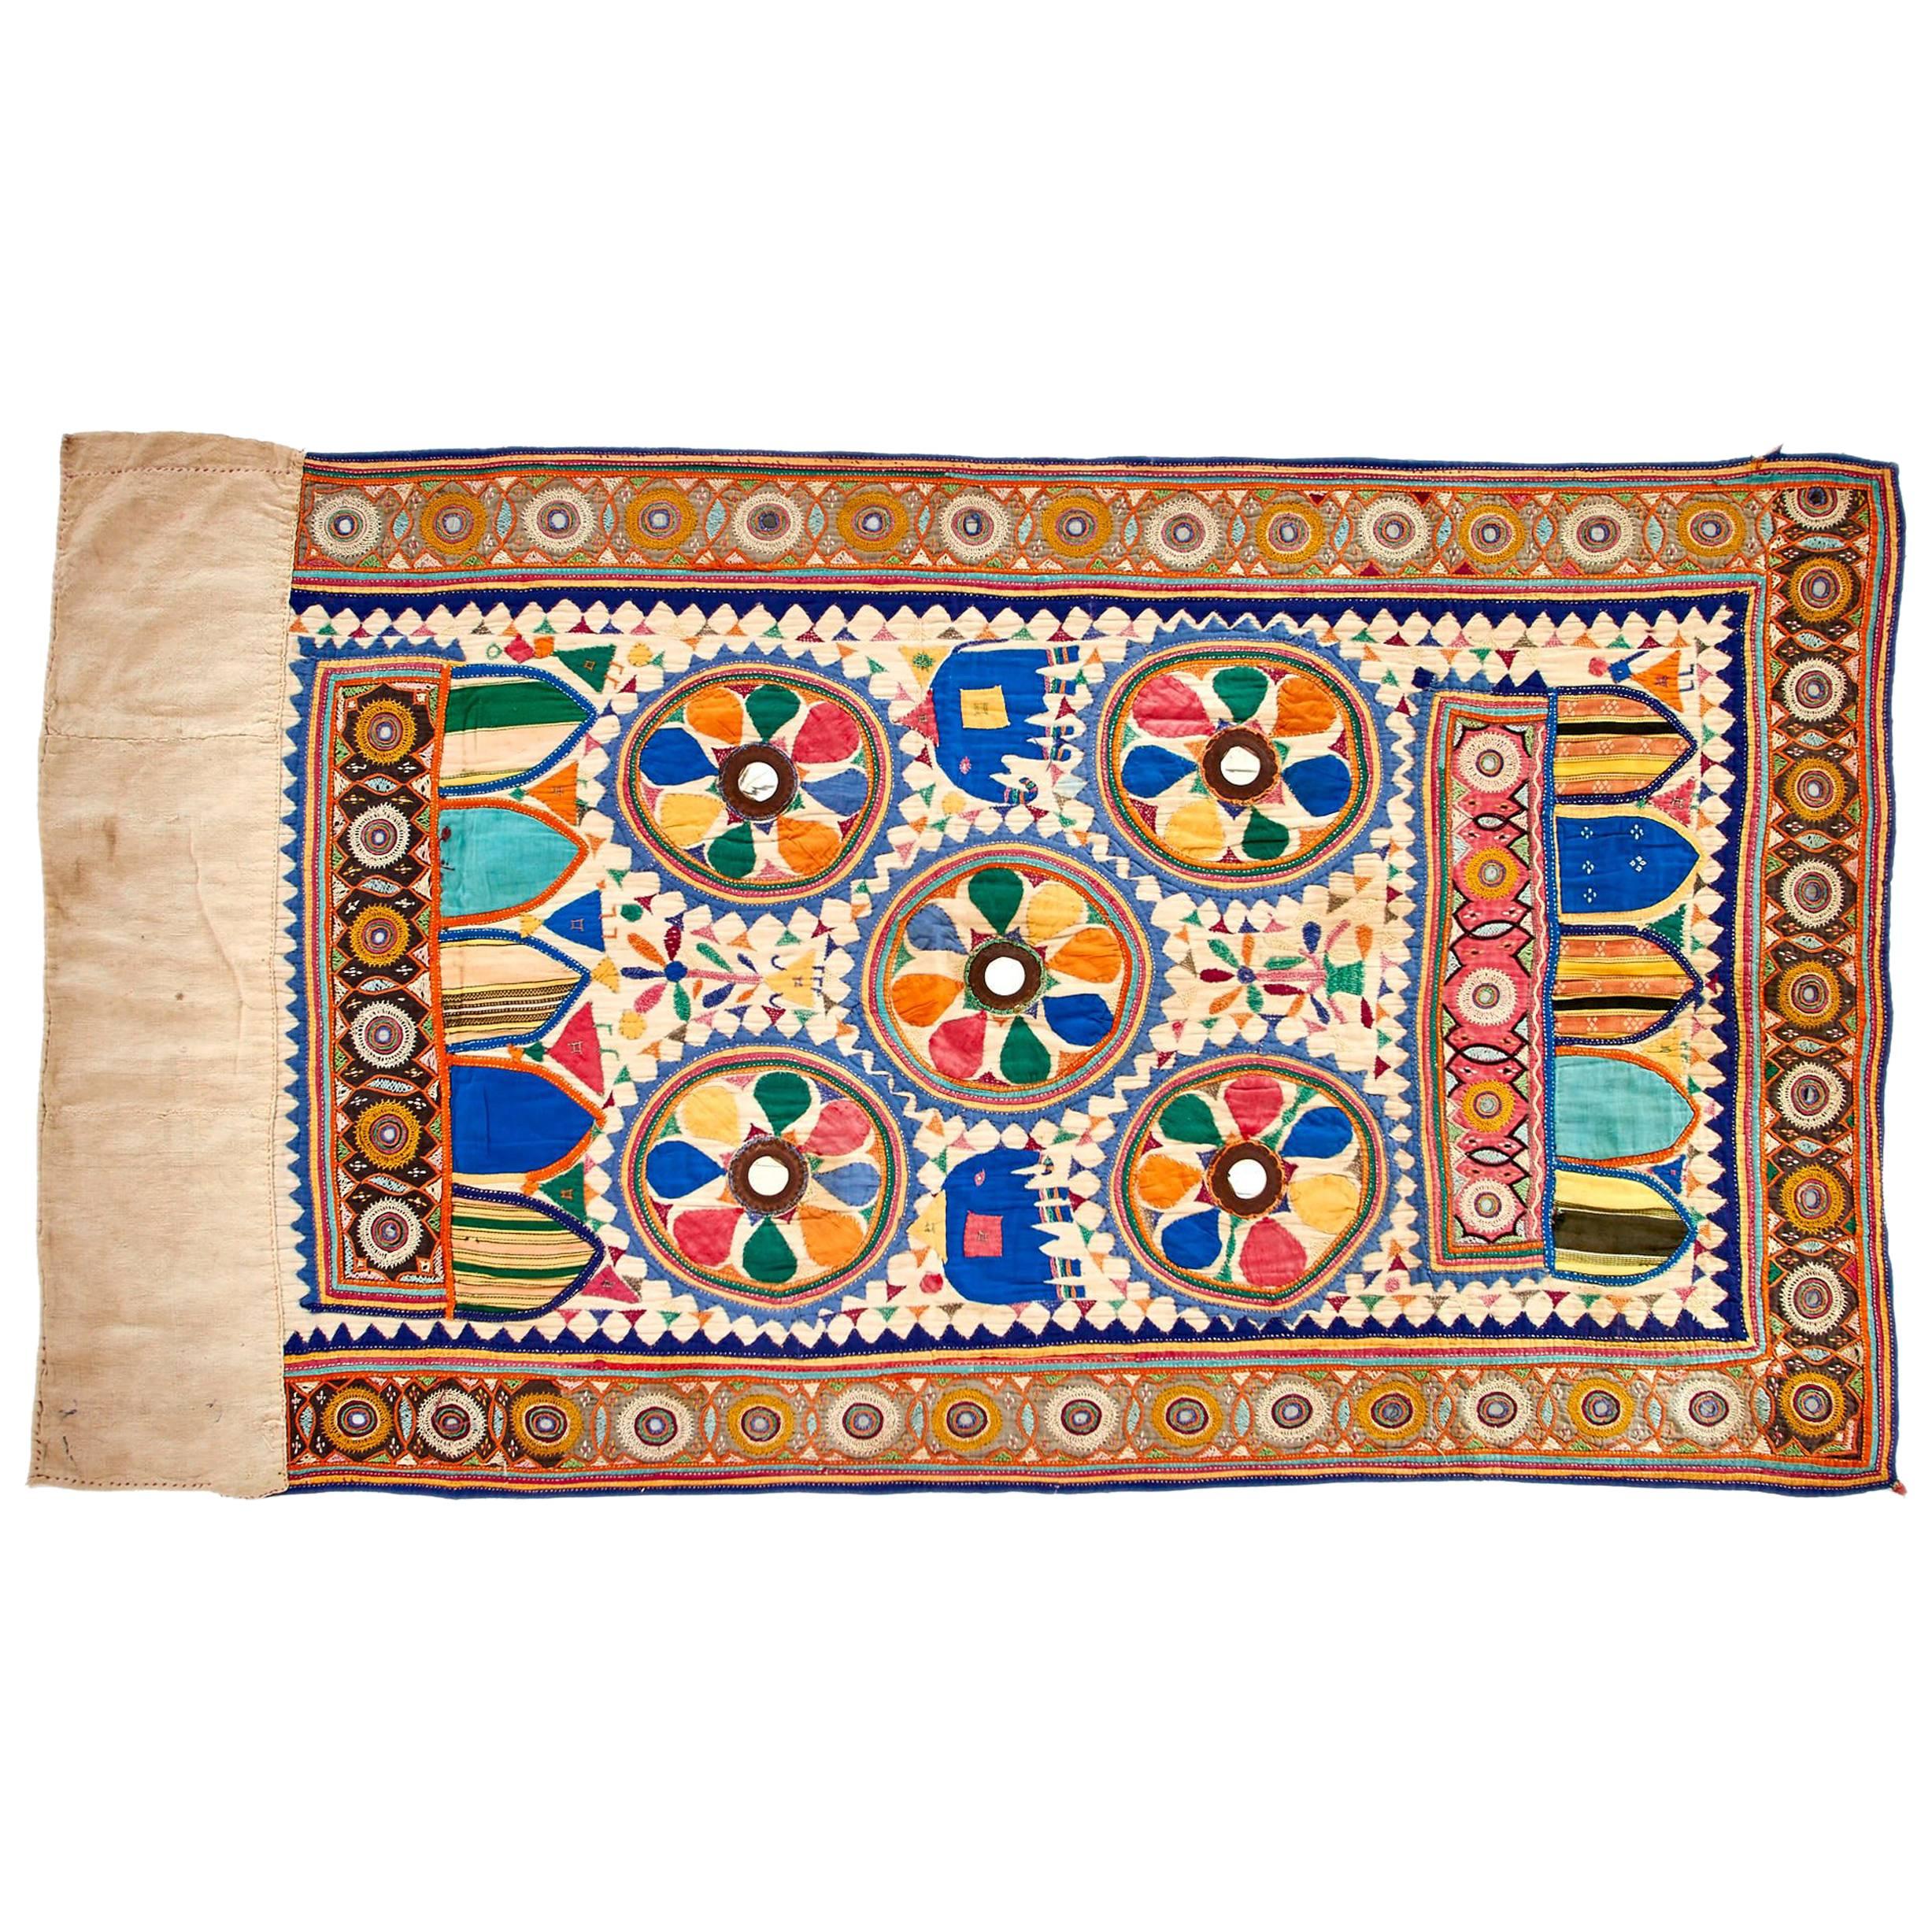 Antique Gujarati Embroidered Wall Hanging